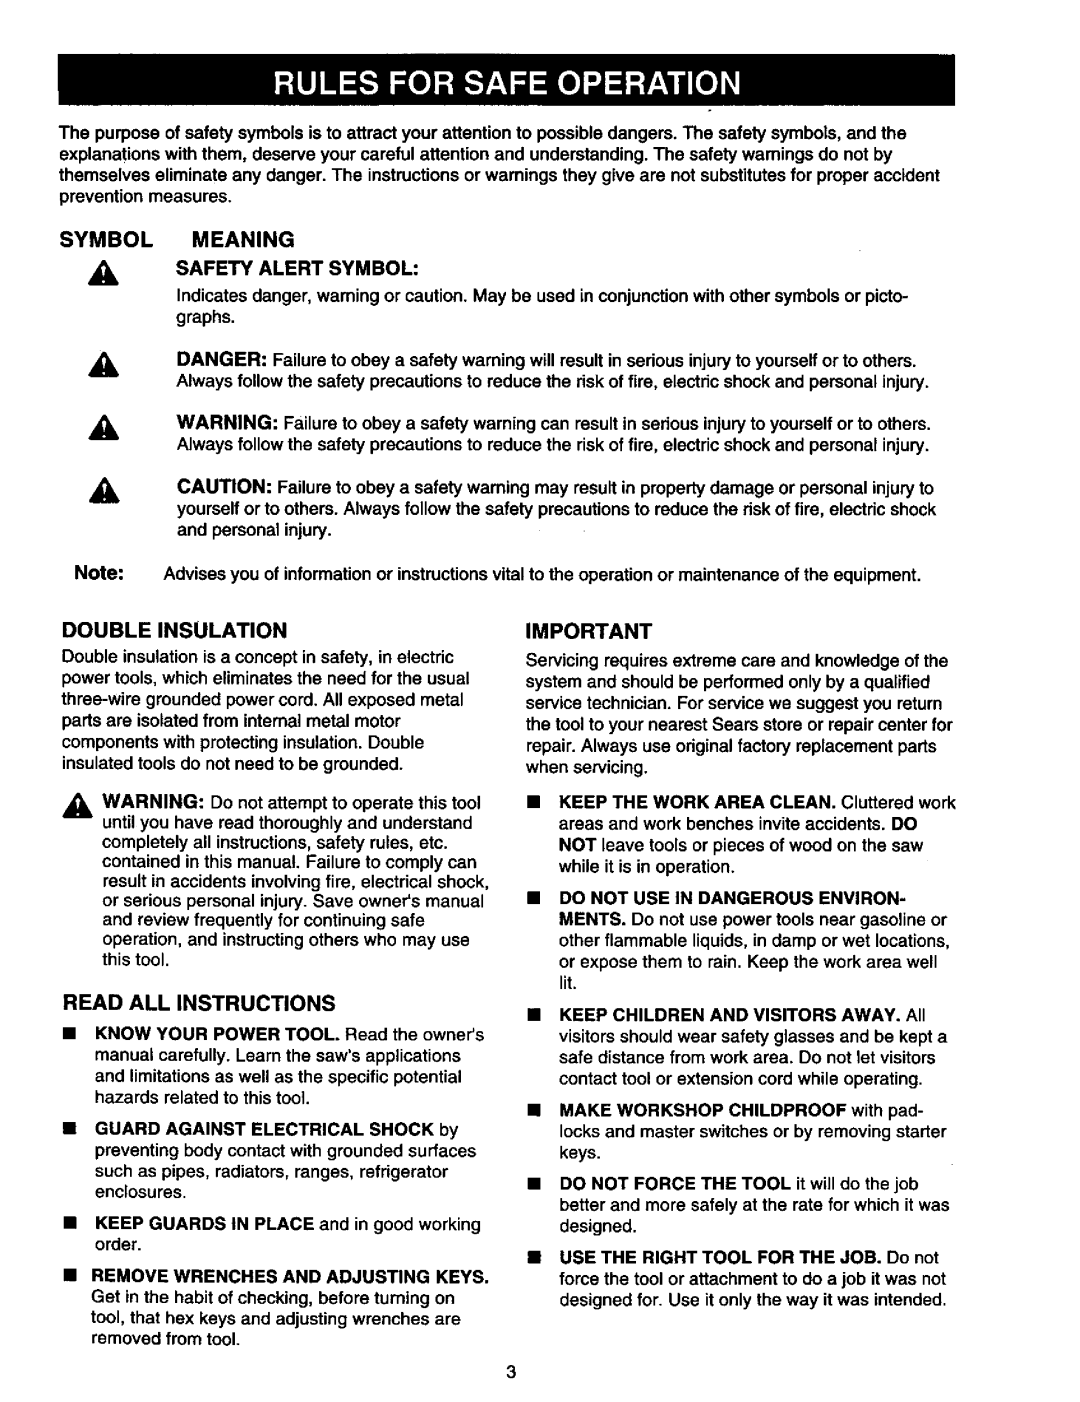 Craftsman 315.21213 manual A A A, Symbol Meaning, Double Insulation, Read All Instructions 